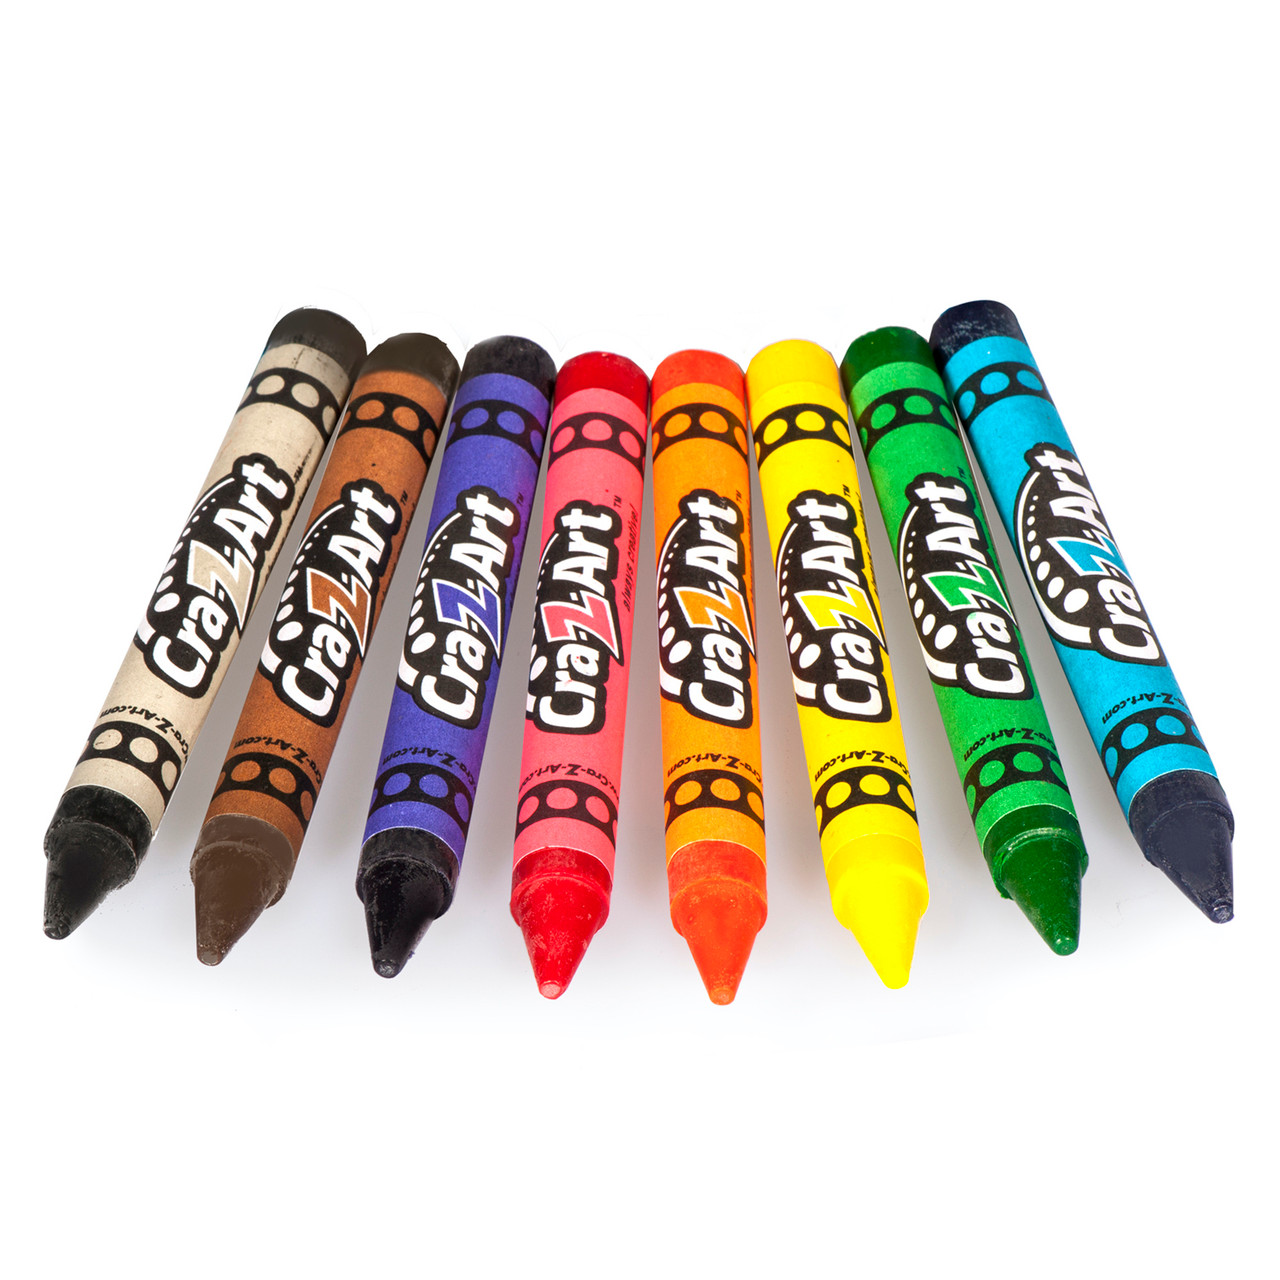  Crayola Crayon Classpack - 400ct (8 Assorted Colors), Large  Crayons for Kids, Bulk Classroom Supplies for Teachers, Back to School,  Ages 3+ : Everything Else